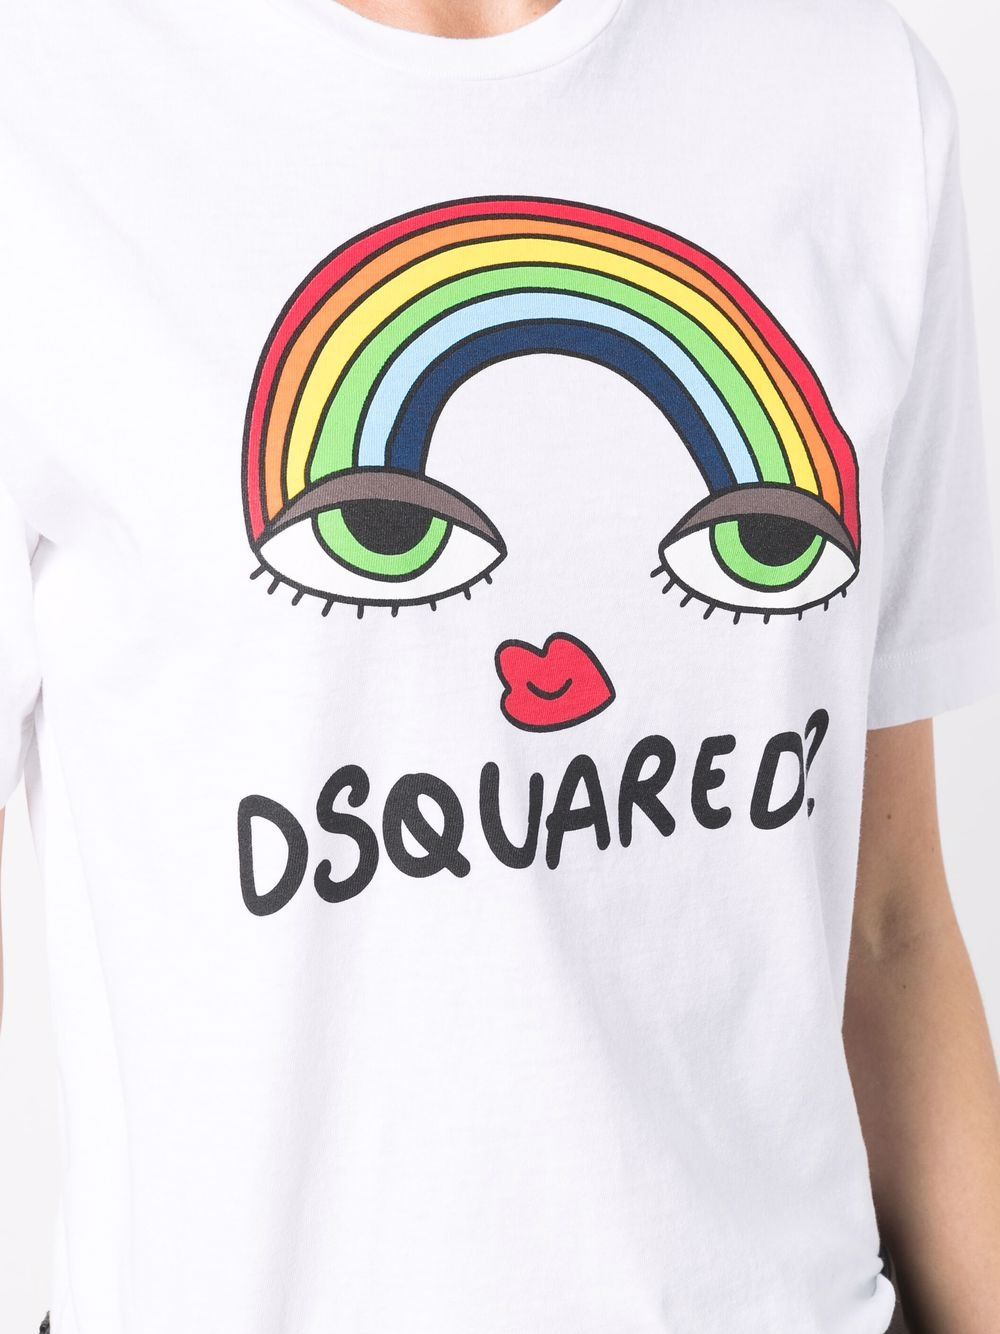 Shop Dsquared2 rainbow logo print T-shirt with Express Delivery - FARFETCH